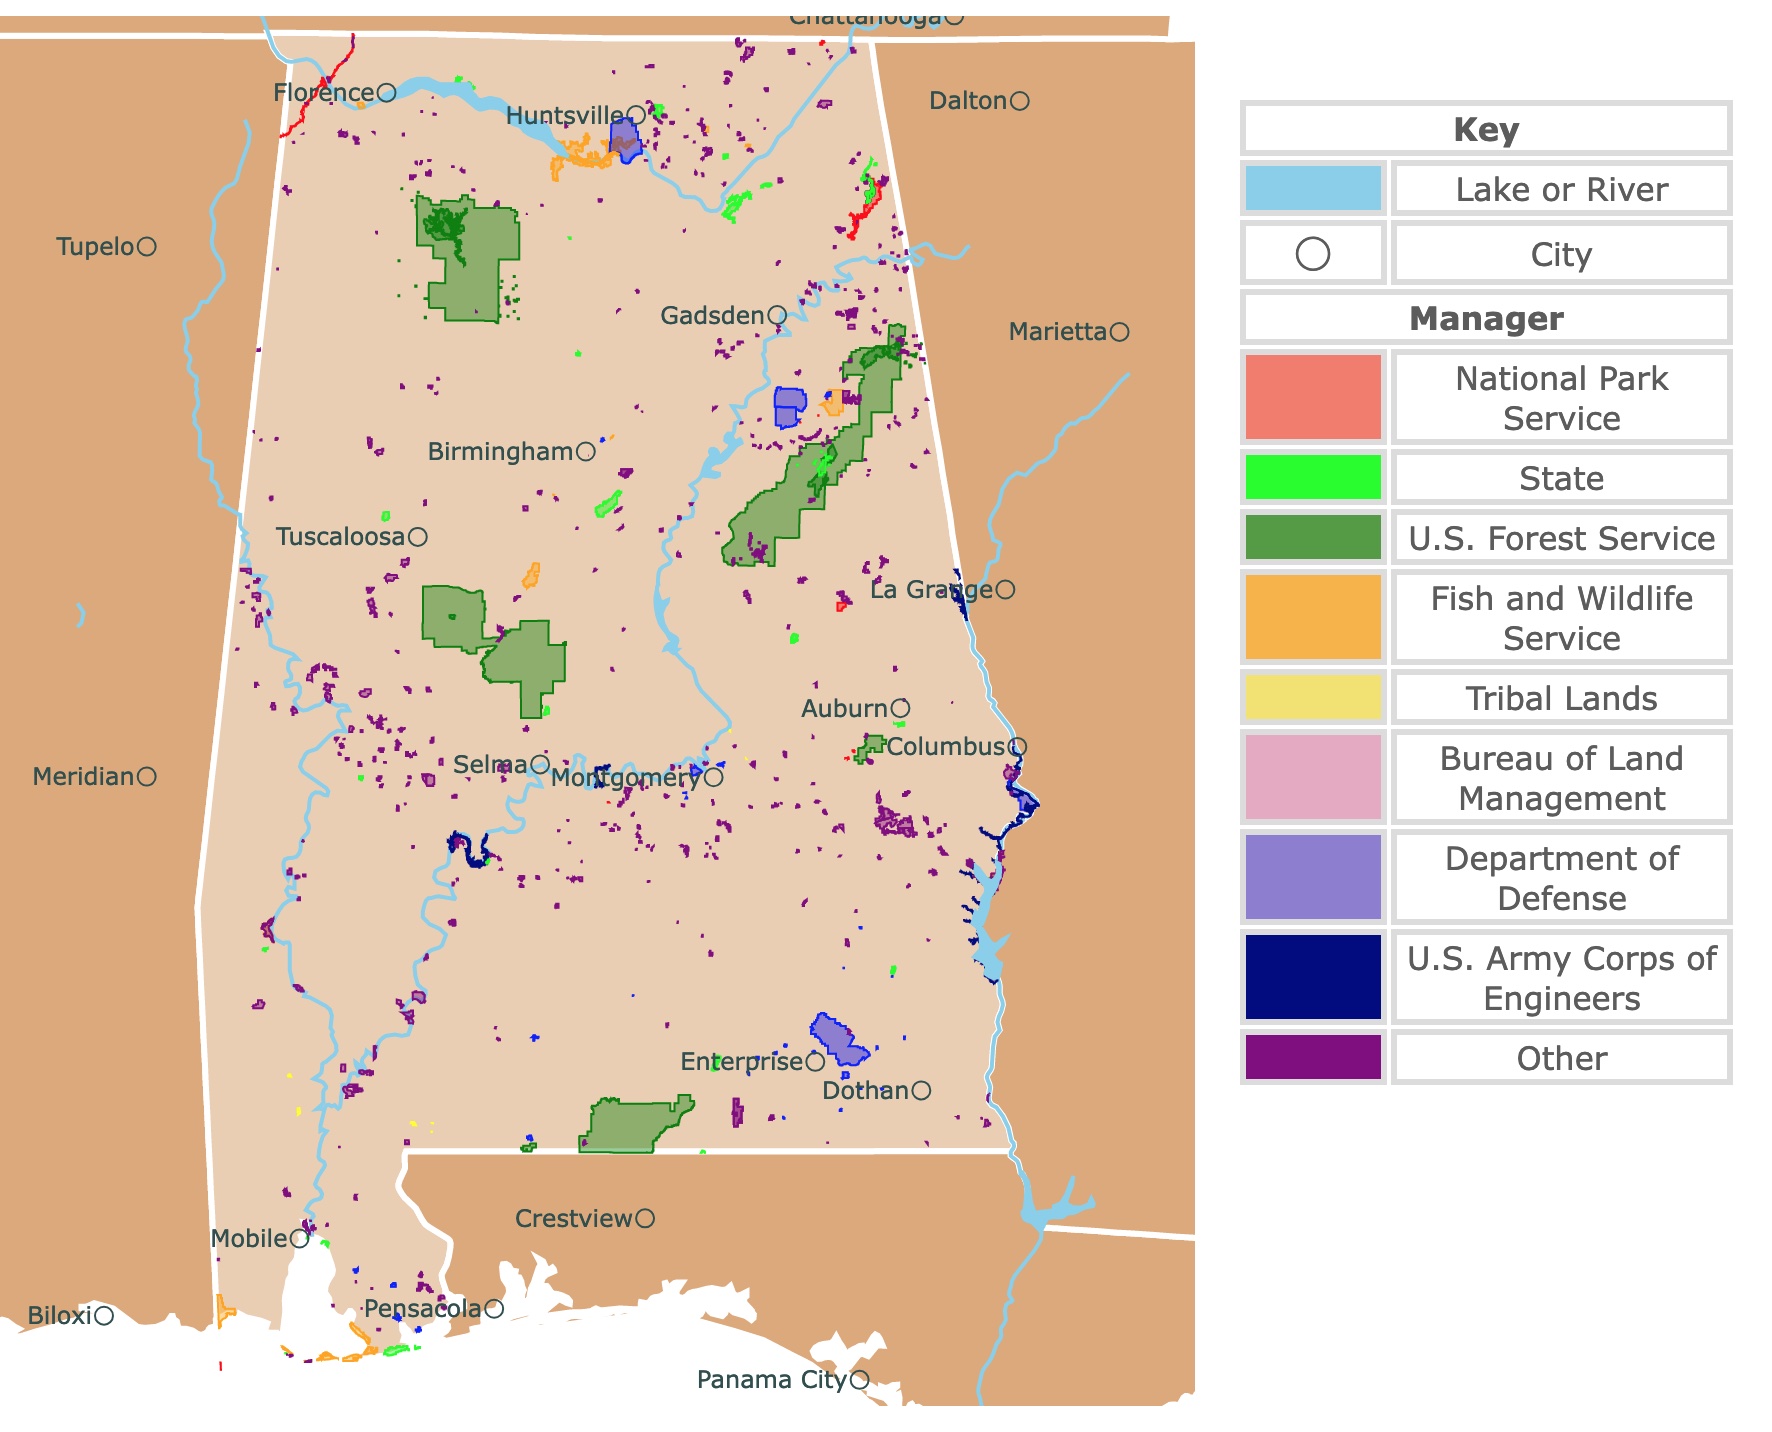 Map of Alabama's state parks, national parks, forests, and public lands areas